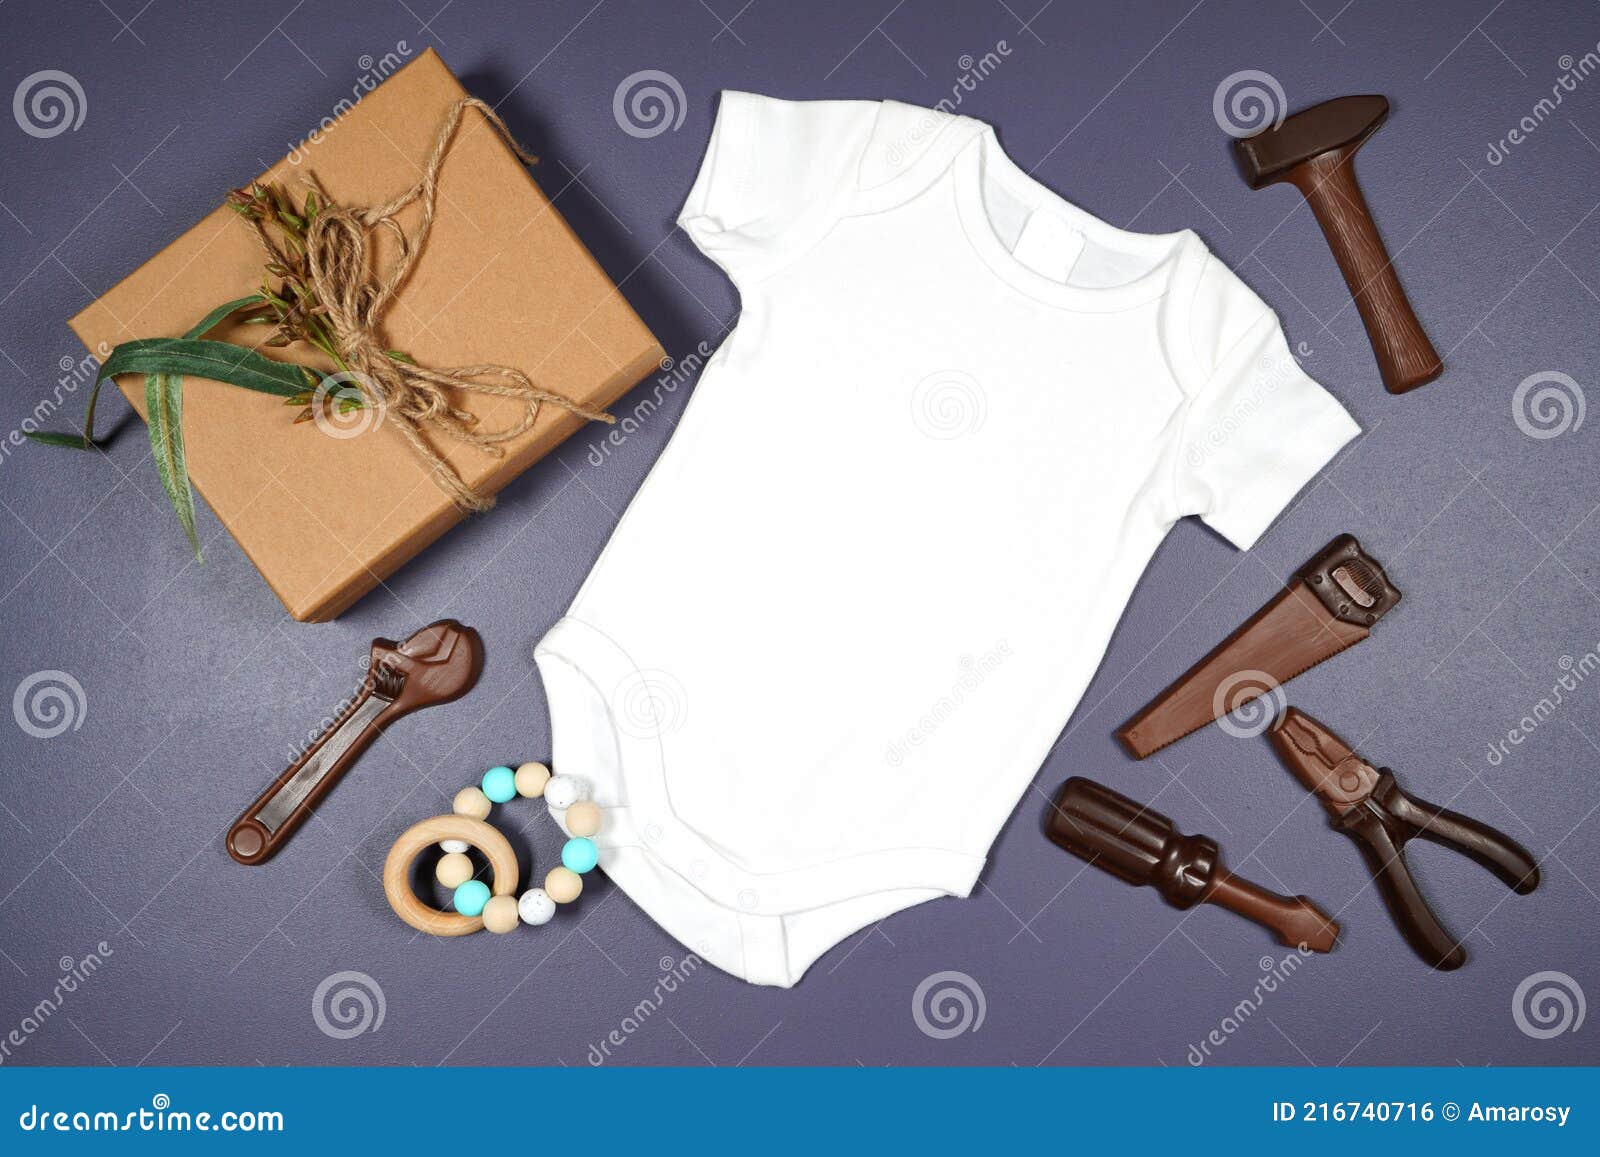 father's day or masculine birthday theme baby romper onesie flatlay mockup.